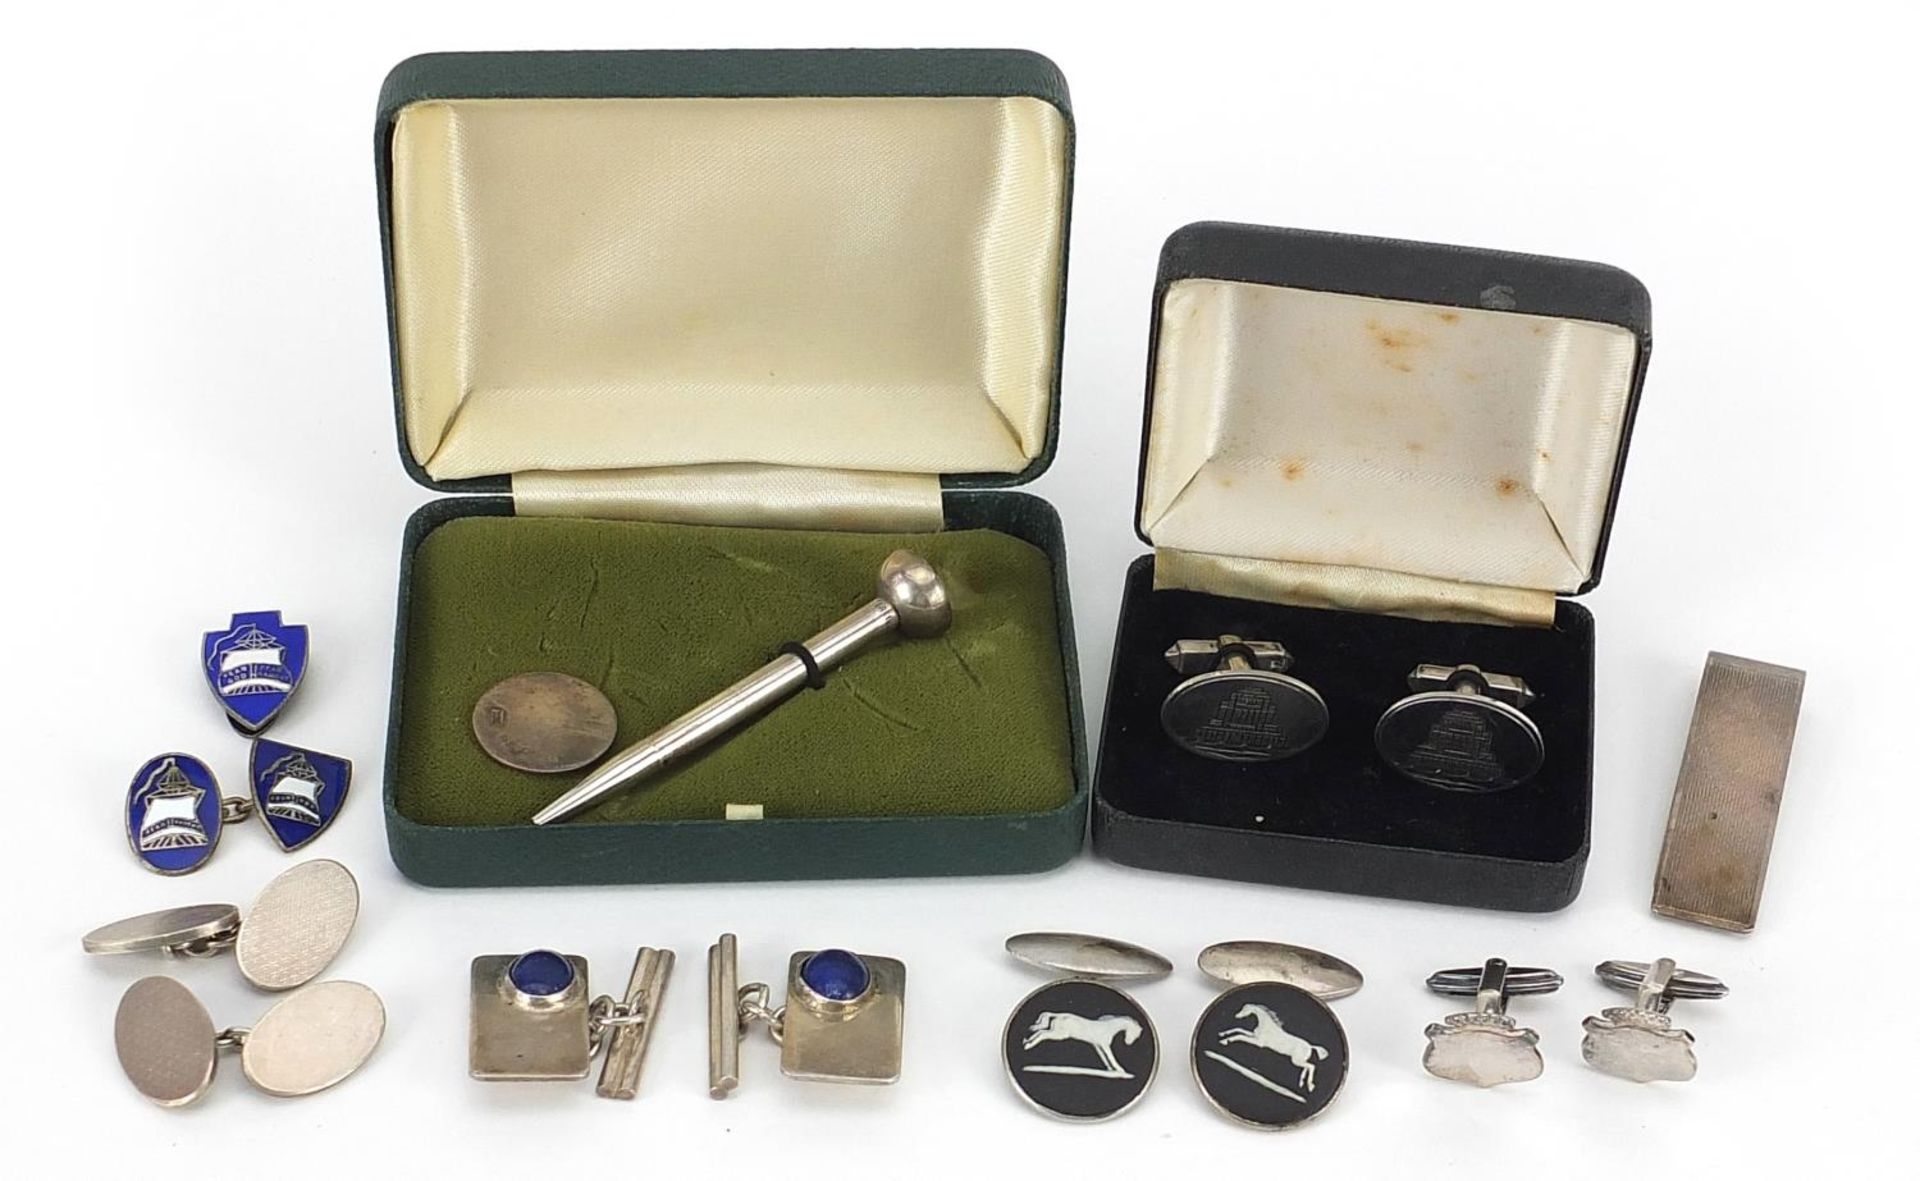 Collection of silver and white metal cufflinks, money clip and golf tee design propelling pencil,